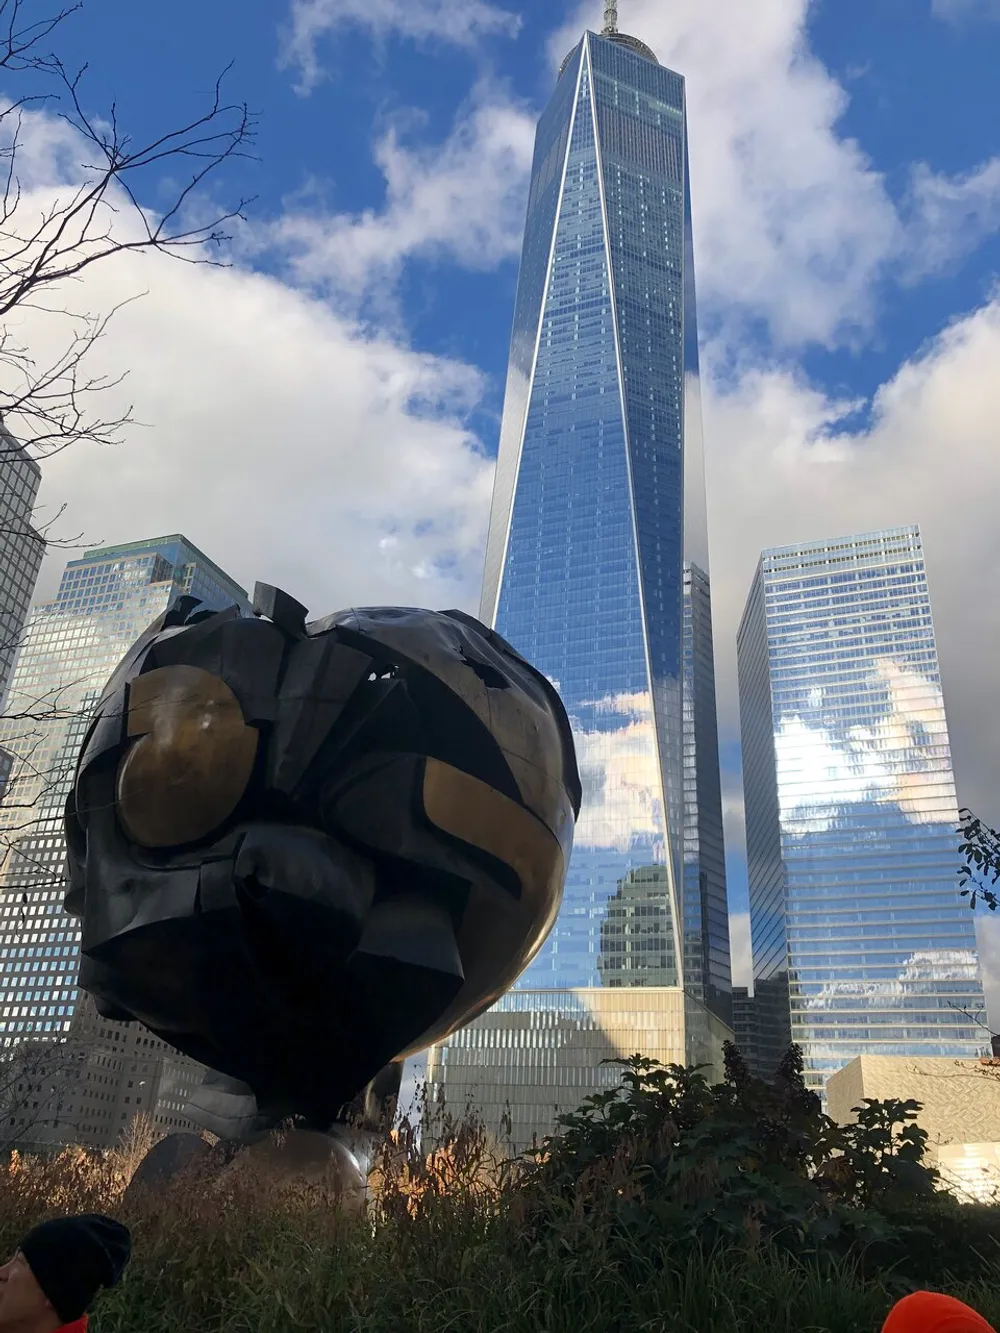 The image shows the Sphere sculpture with damage from 911 set against a backdrop of the One World Trade Center under a partly cloudy sky